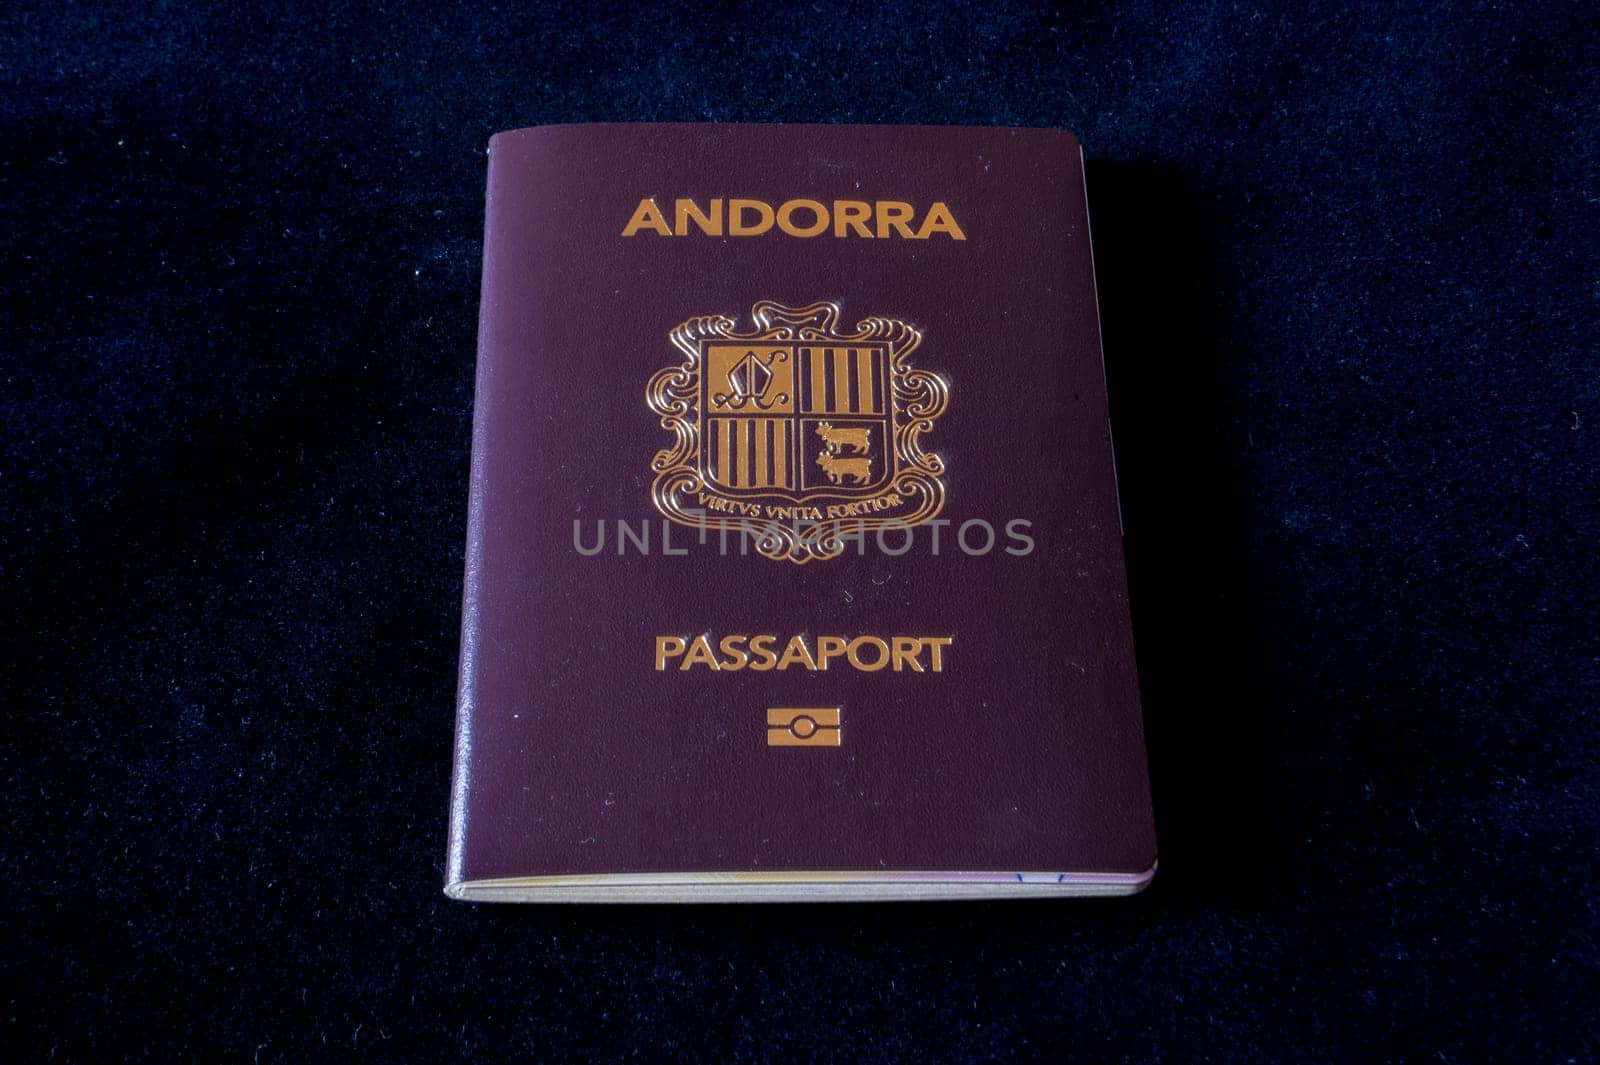 Passport of the Principality of Andorra on a black background by martinscphoto